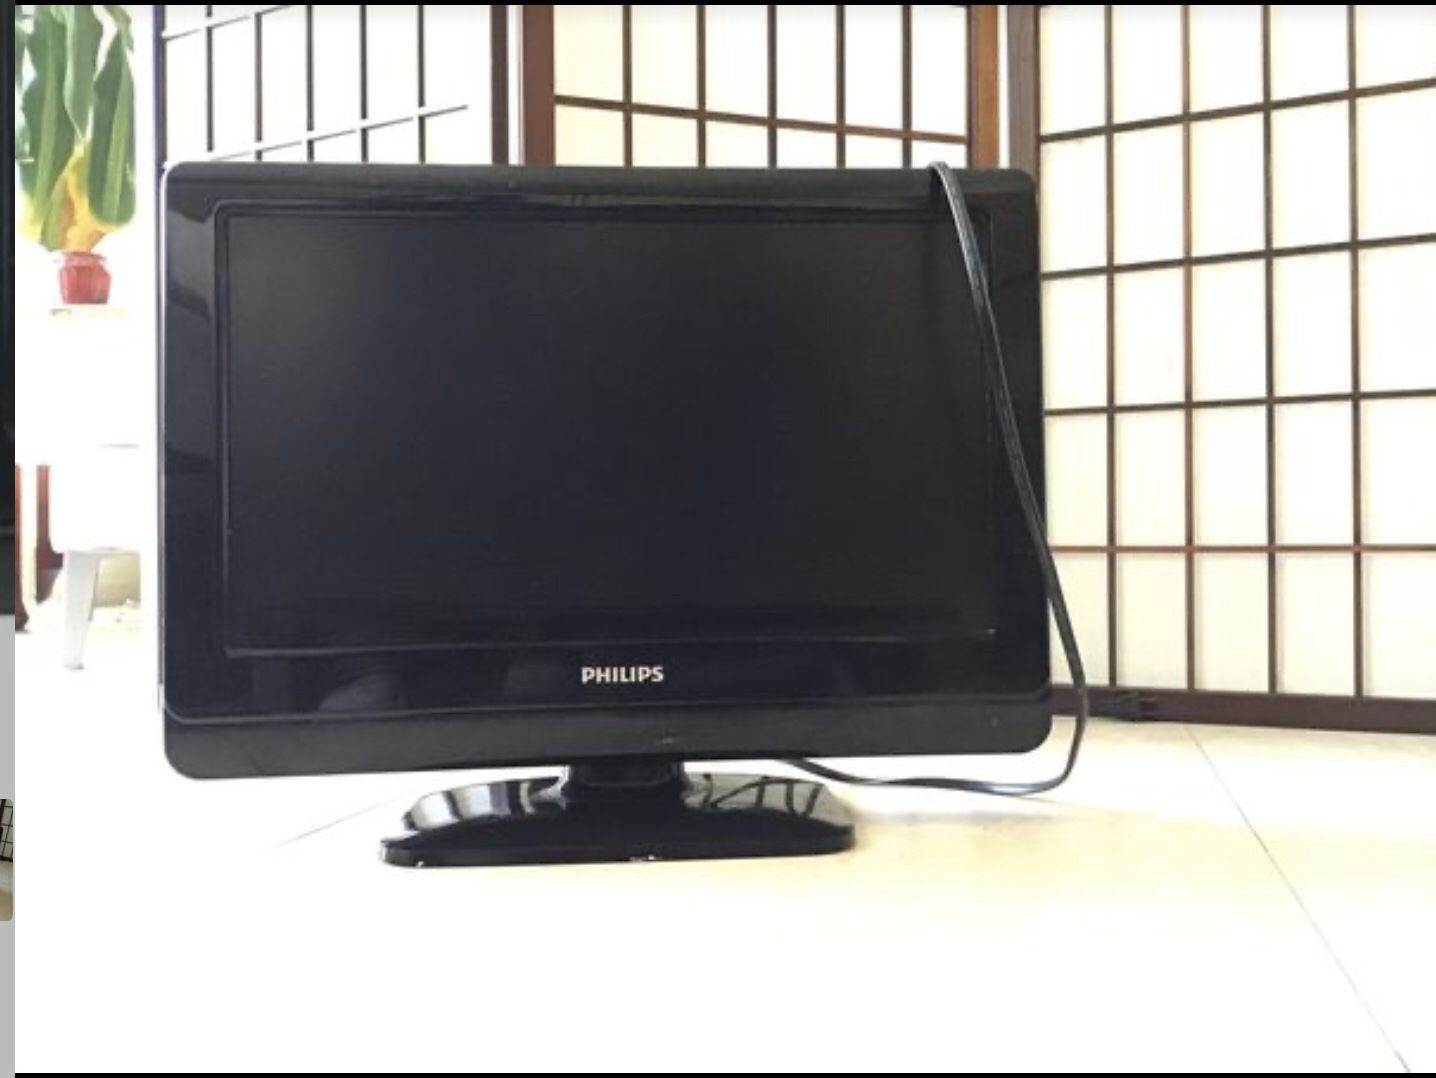 Philips TV perfect condition it only needs universal remote control.